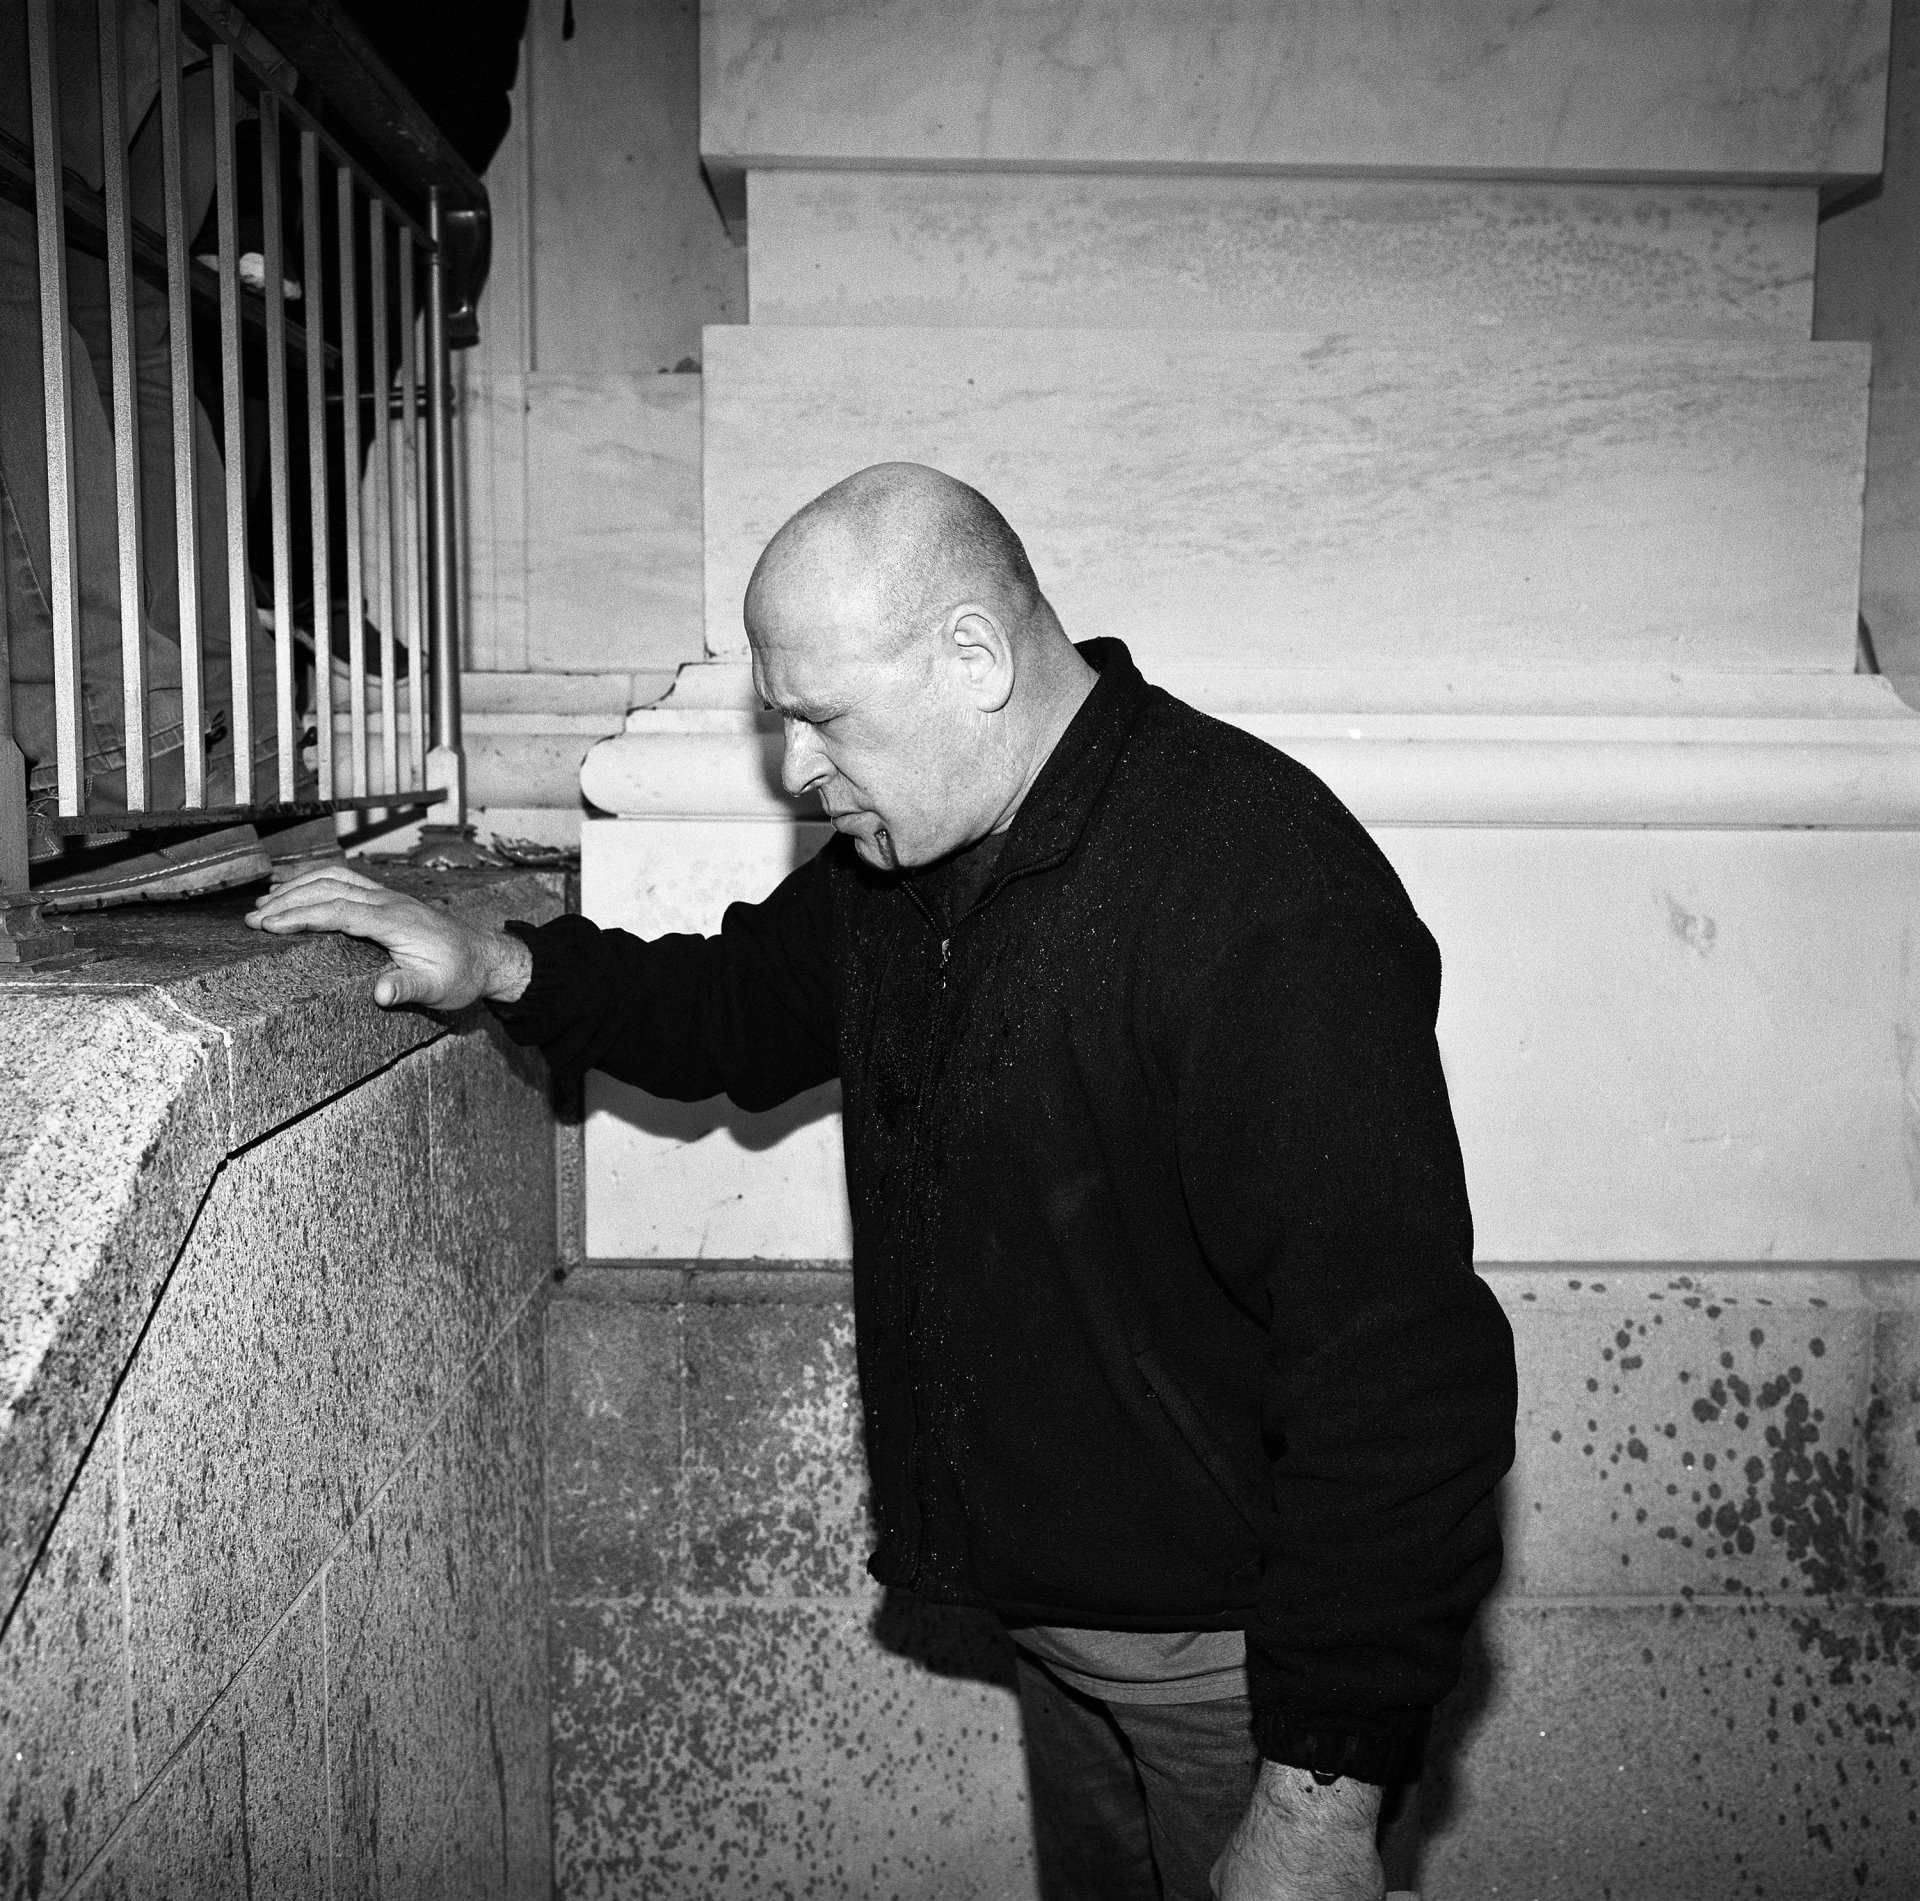 A man bleeding from a face wound and blinded by pepper spray braces himself by one of the doors to the Capitol that was breached by pro-Trump protesters, in Washington DC, USA.